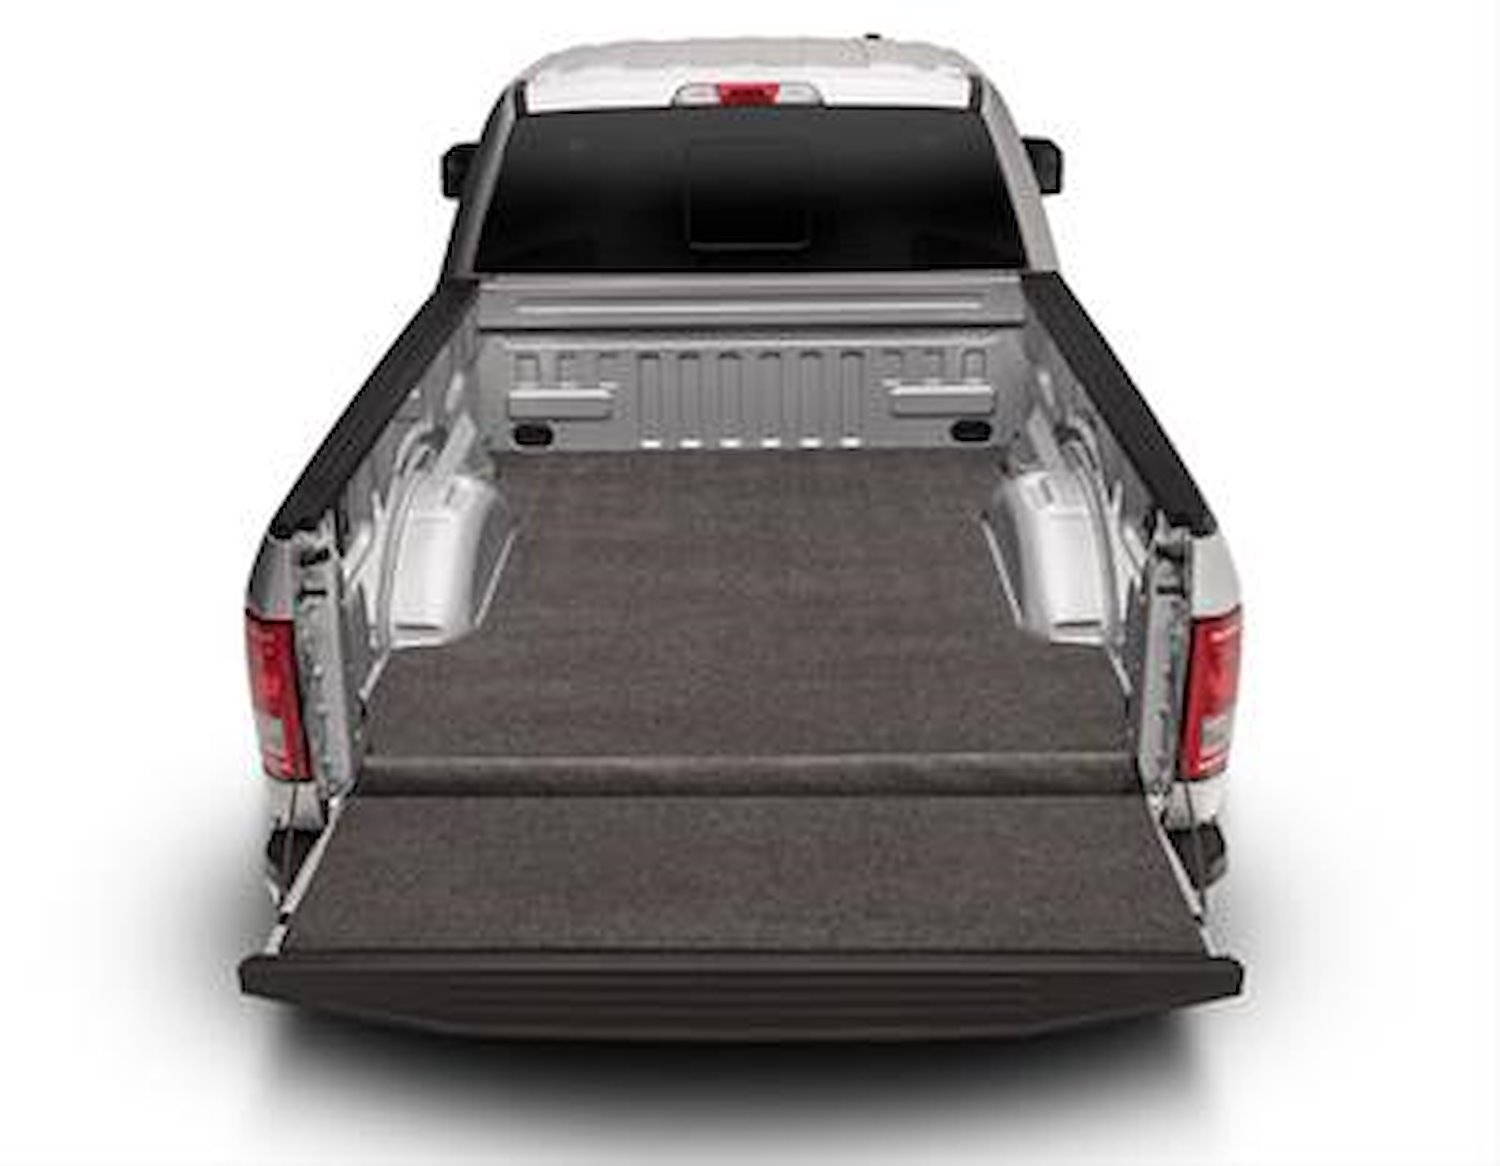 XLTBMB15SBS XLT BEDMAT FOR SPRAY-IN OR NO BED LINER 15-22 GM COLORADO/CANYON 6' BED